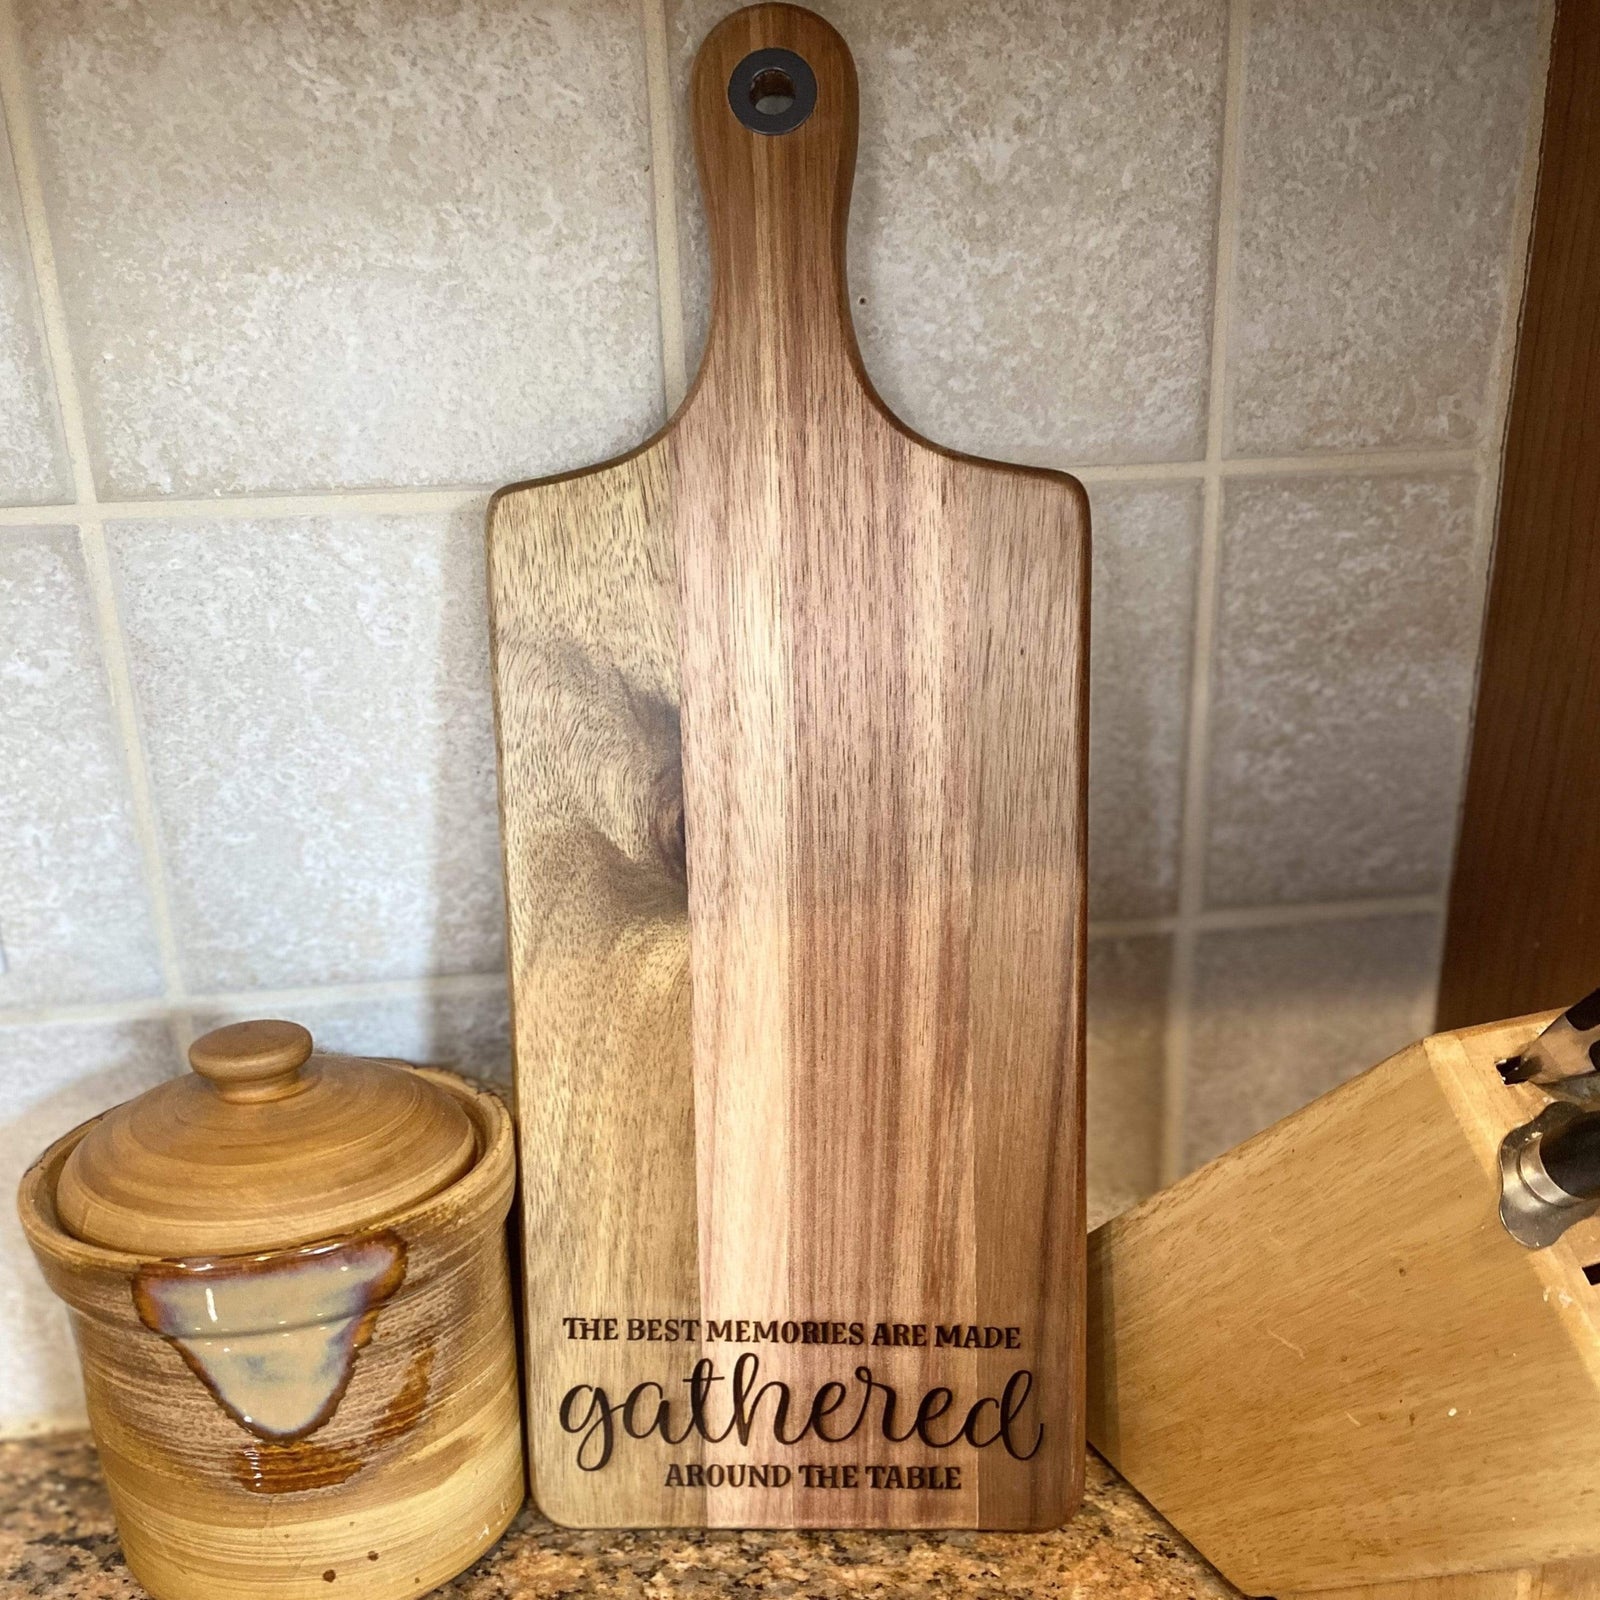 Natural Teak Wood Gathered Around the Table' Cutting Board Ideal for Housewarming or Wedding Gifts